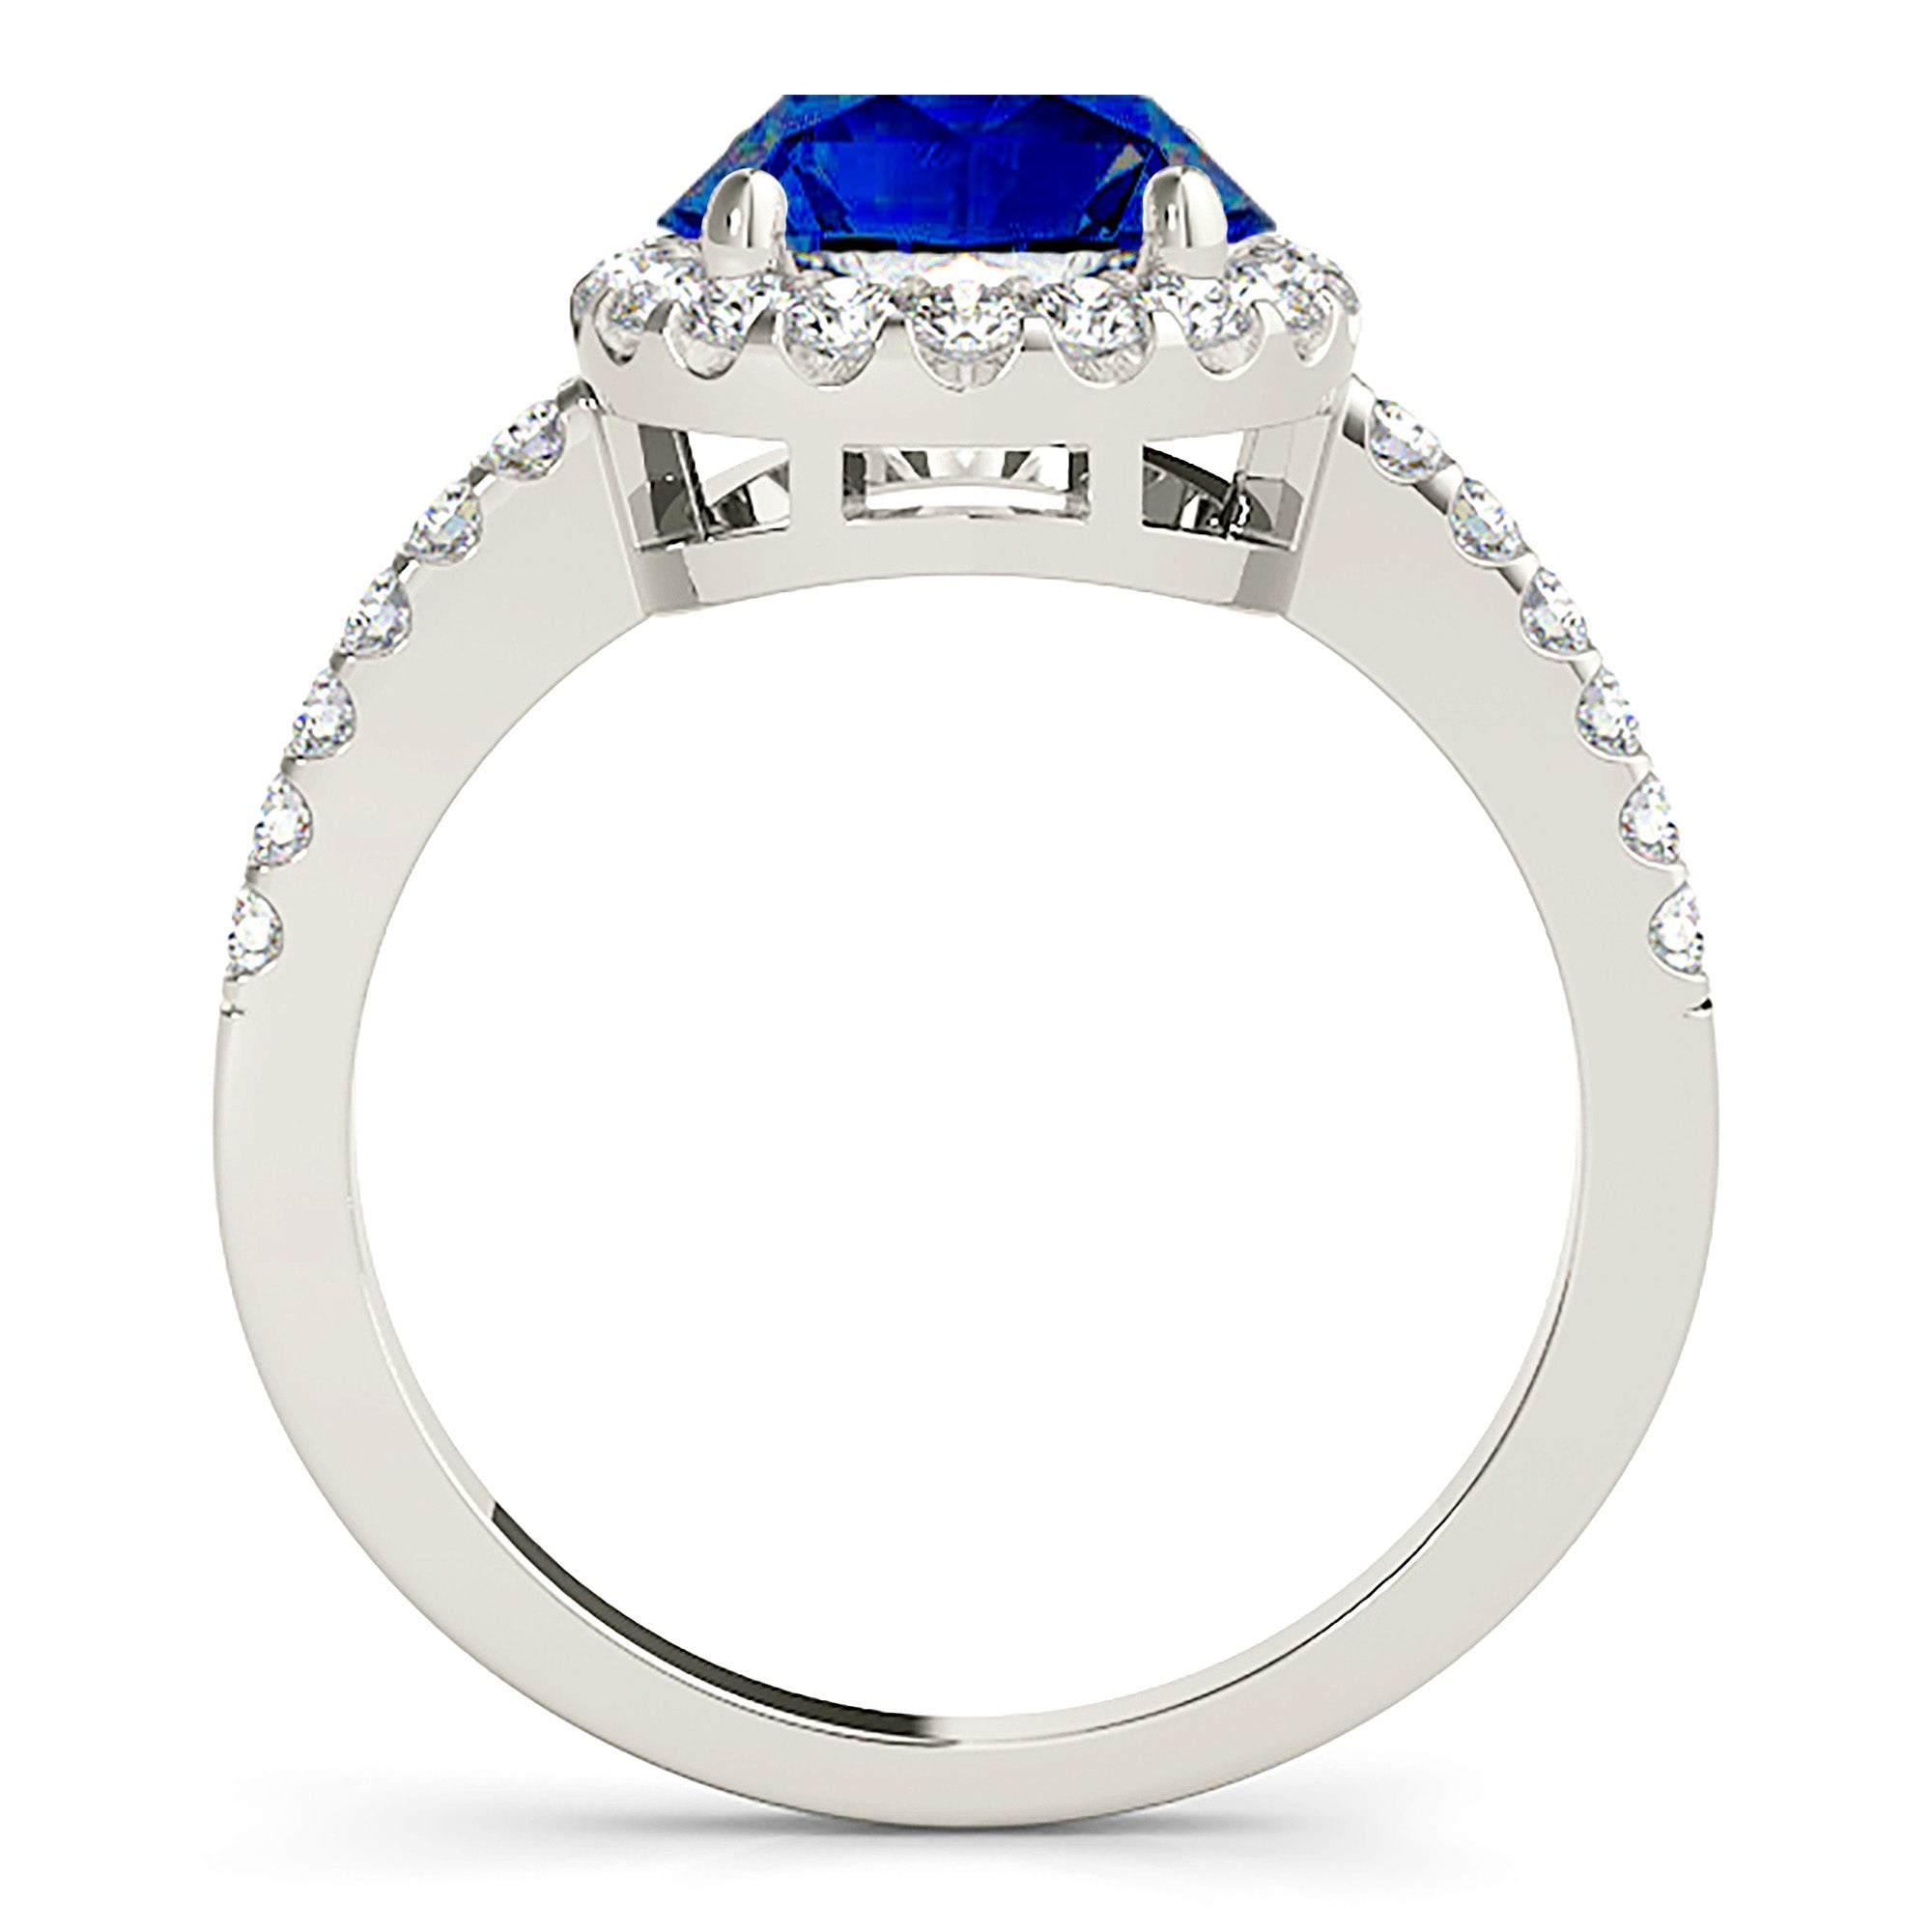 2.41 ct. Genuine Blue Sapphire Halo Ring With 0.45 ctw. Side Diamonds-in 14K/18K White, Yellow, Rose Gold and Platinum - Christmas Jewelry Gift -VIRABYANI